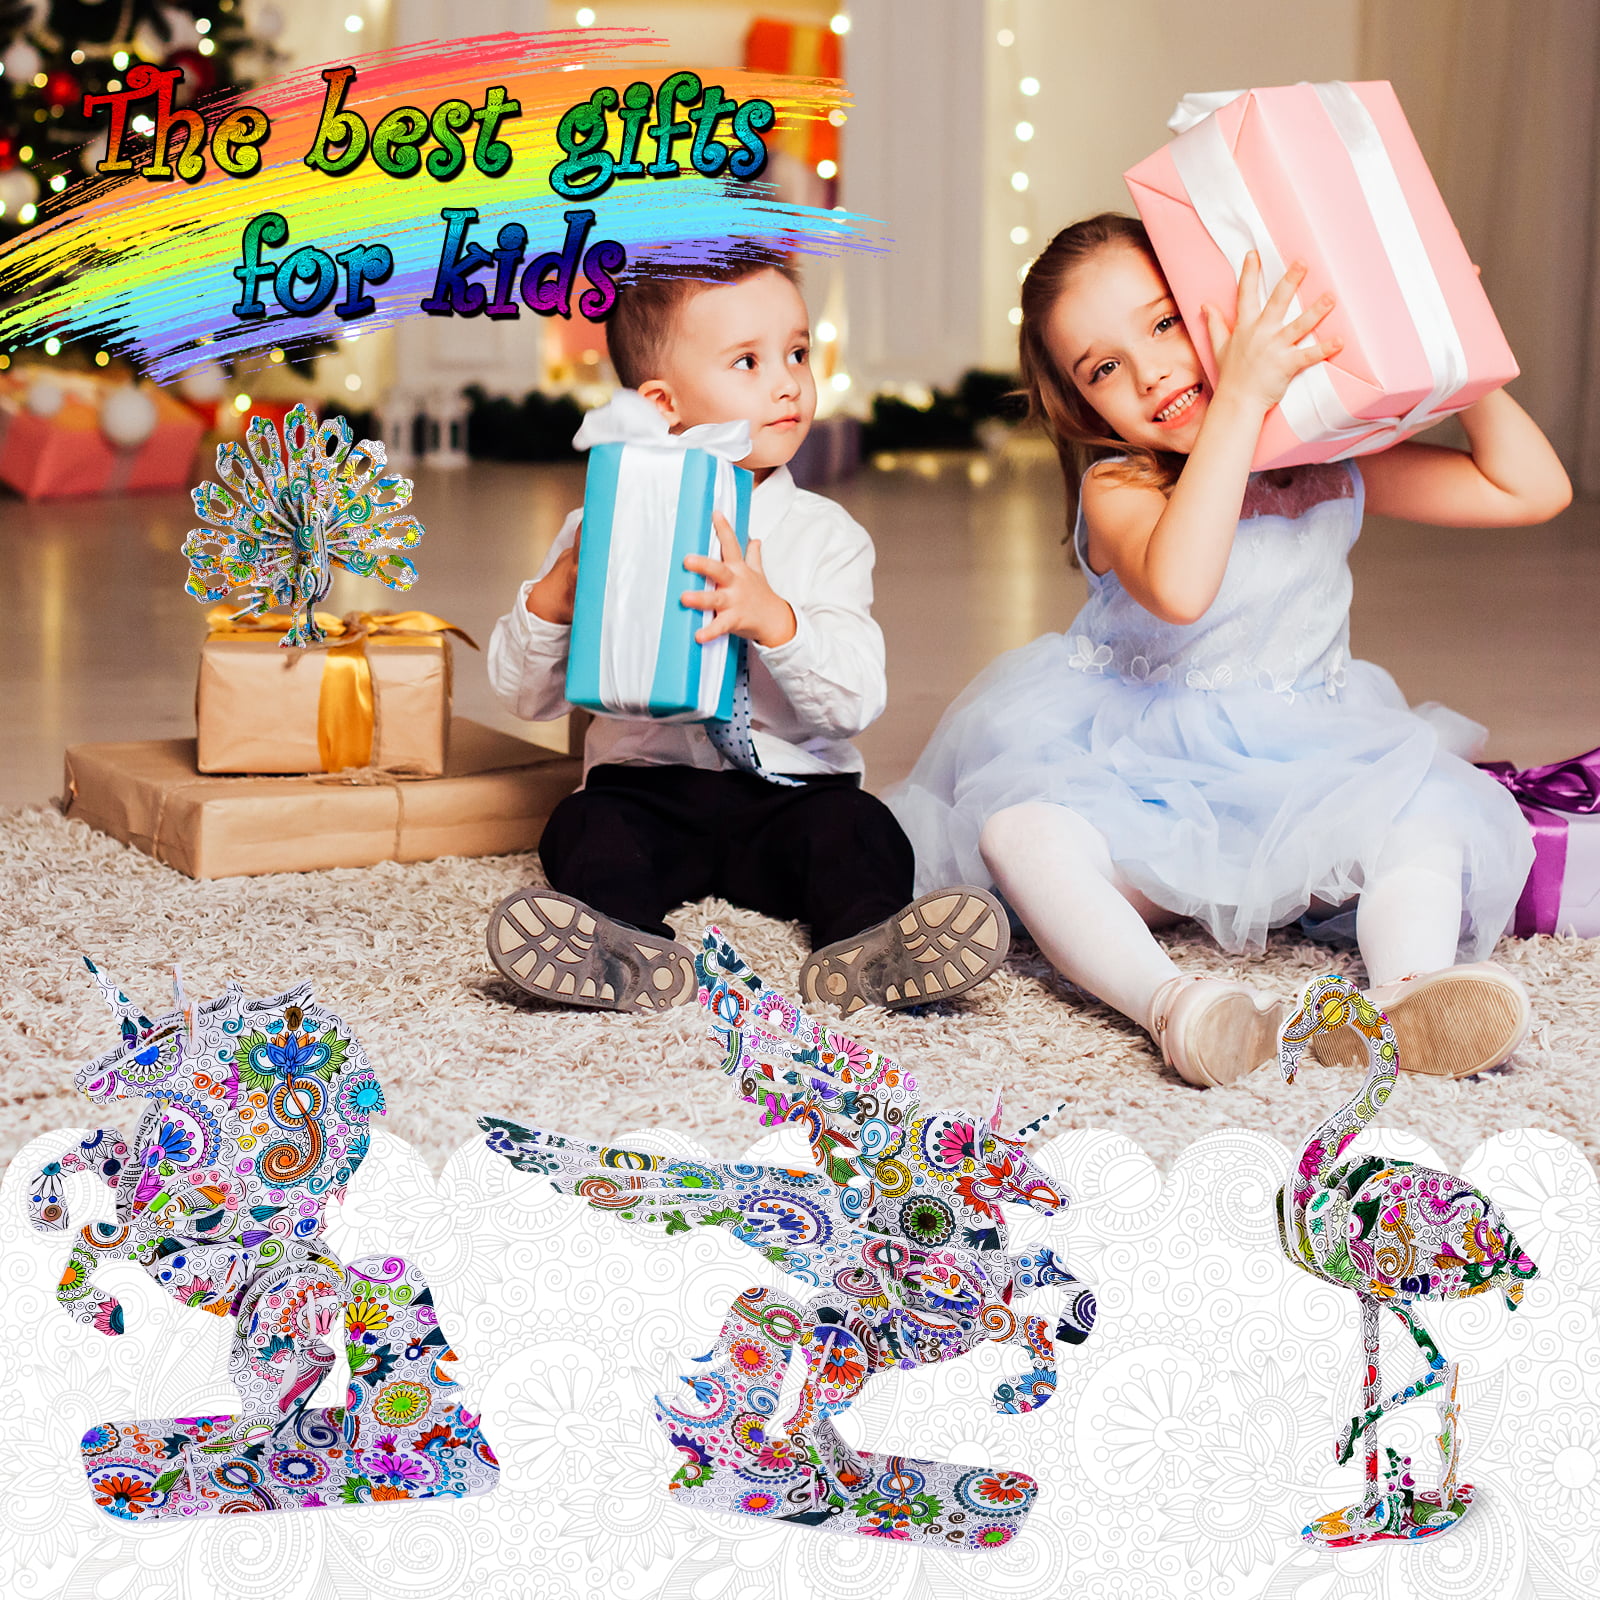 Dream Fun Girls Toys Gift for 6 7 8 9 10 Year Old Kids  Unicorn Gifts for  Girls Craft Kits for Kids Toy Age 6 7 8 9 10 11 Year